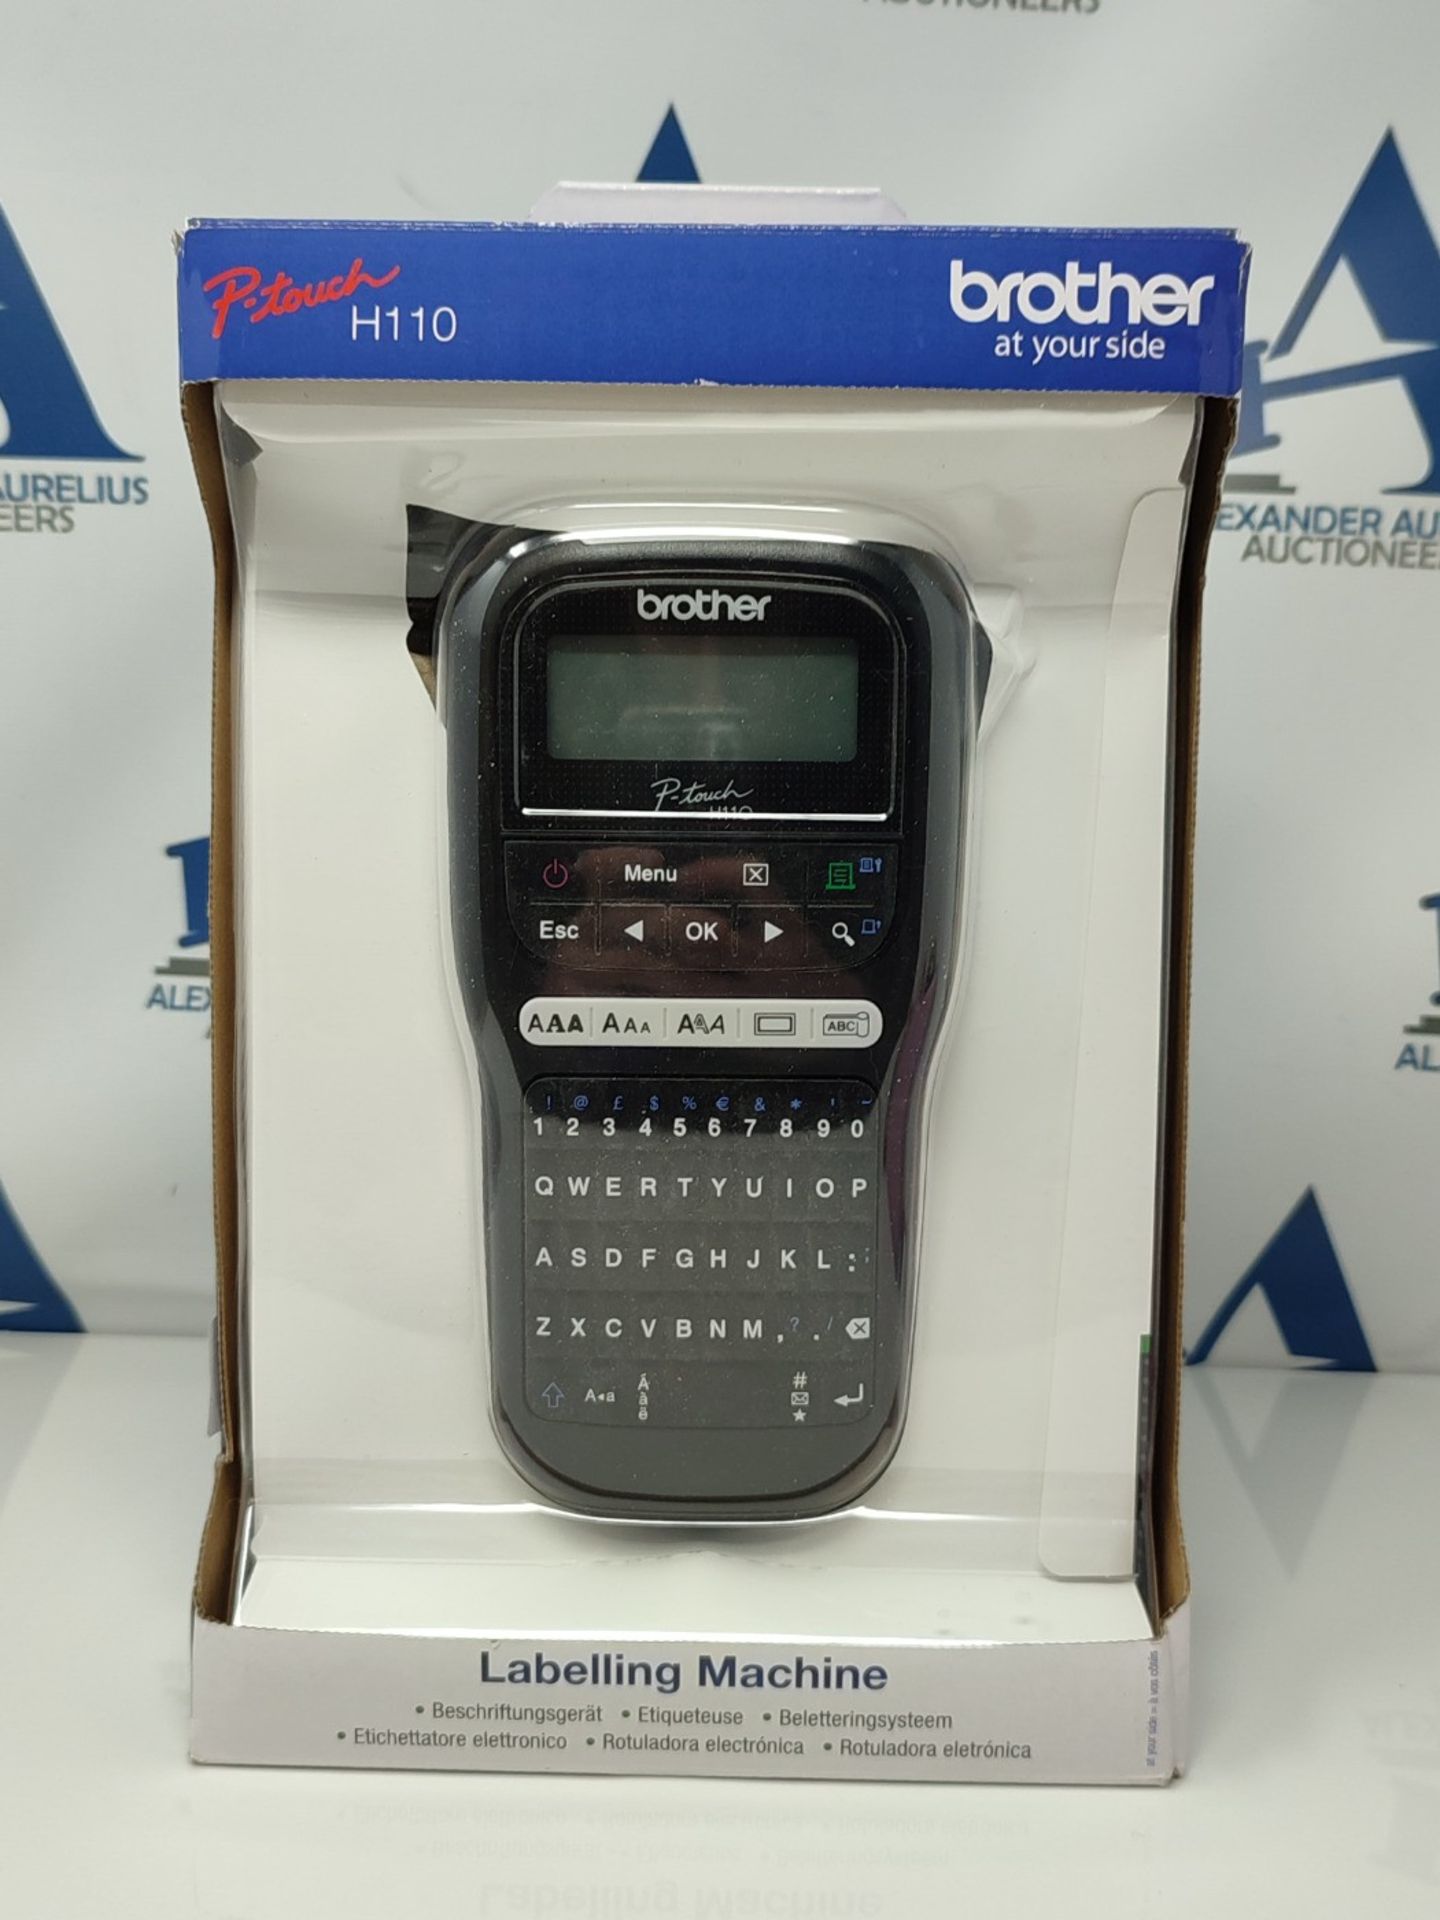 Brother PT-H110 Label Printer | P-Touch Labeller | QWERTY Keyboard | Handheld - Image 2 of 3